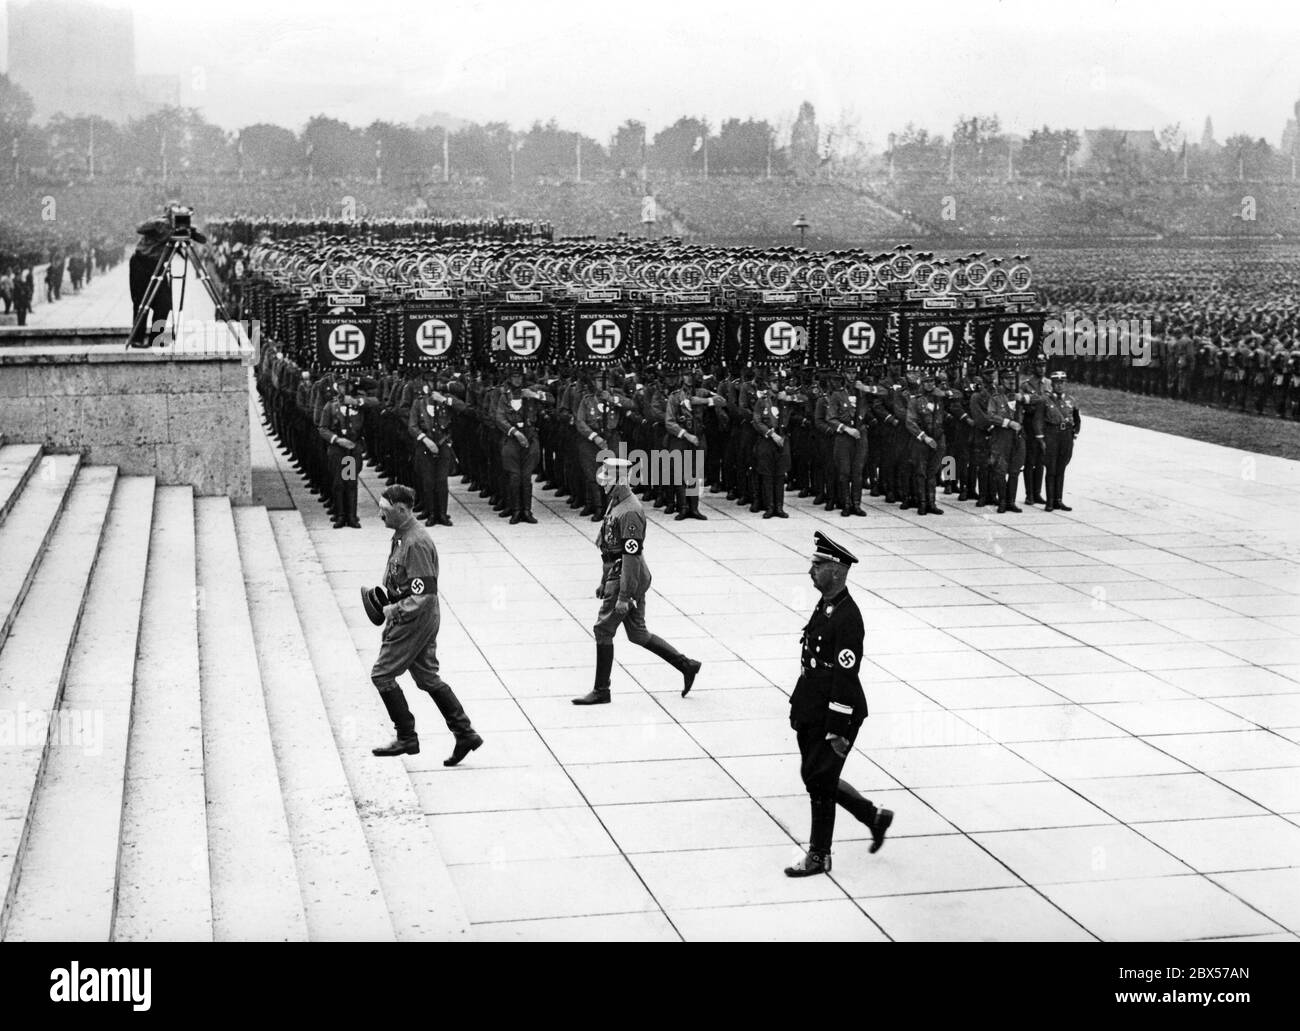 At the grand roll call of the SA, SS, NSFK and NSKK in Luitpoldhain, Adolf Hitler, Viktor Lutze and Heinrich Himmler walk to the platform from the front, past the standards of the SA and a cameraman. Stock Photo